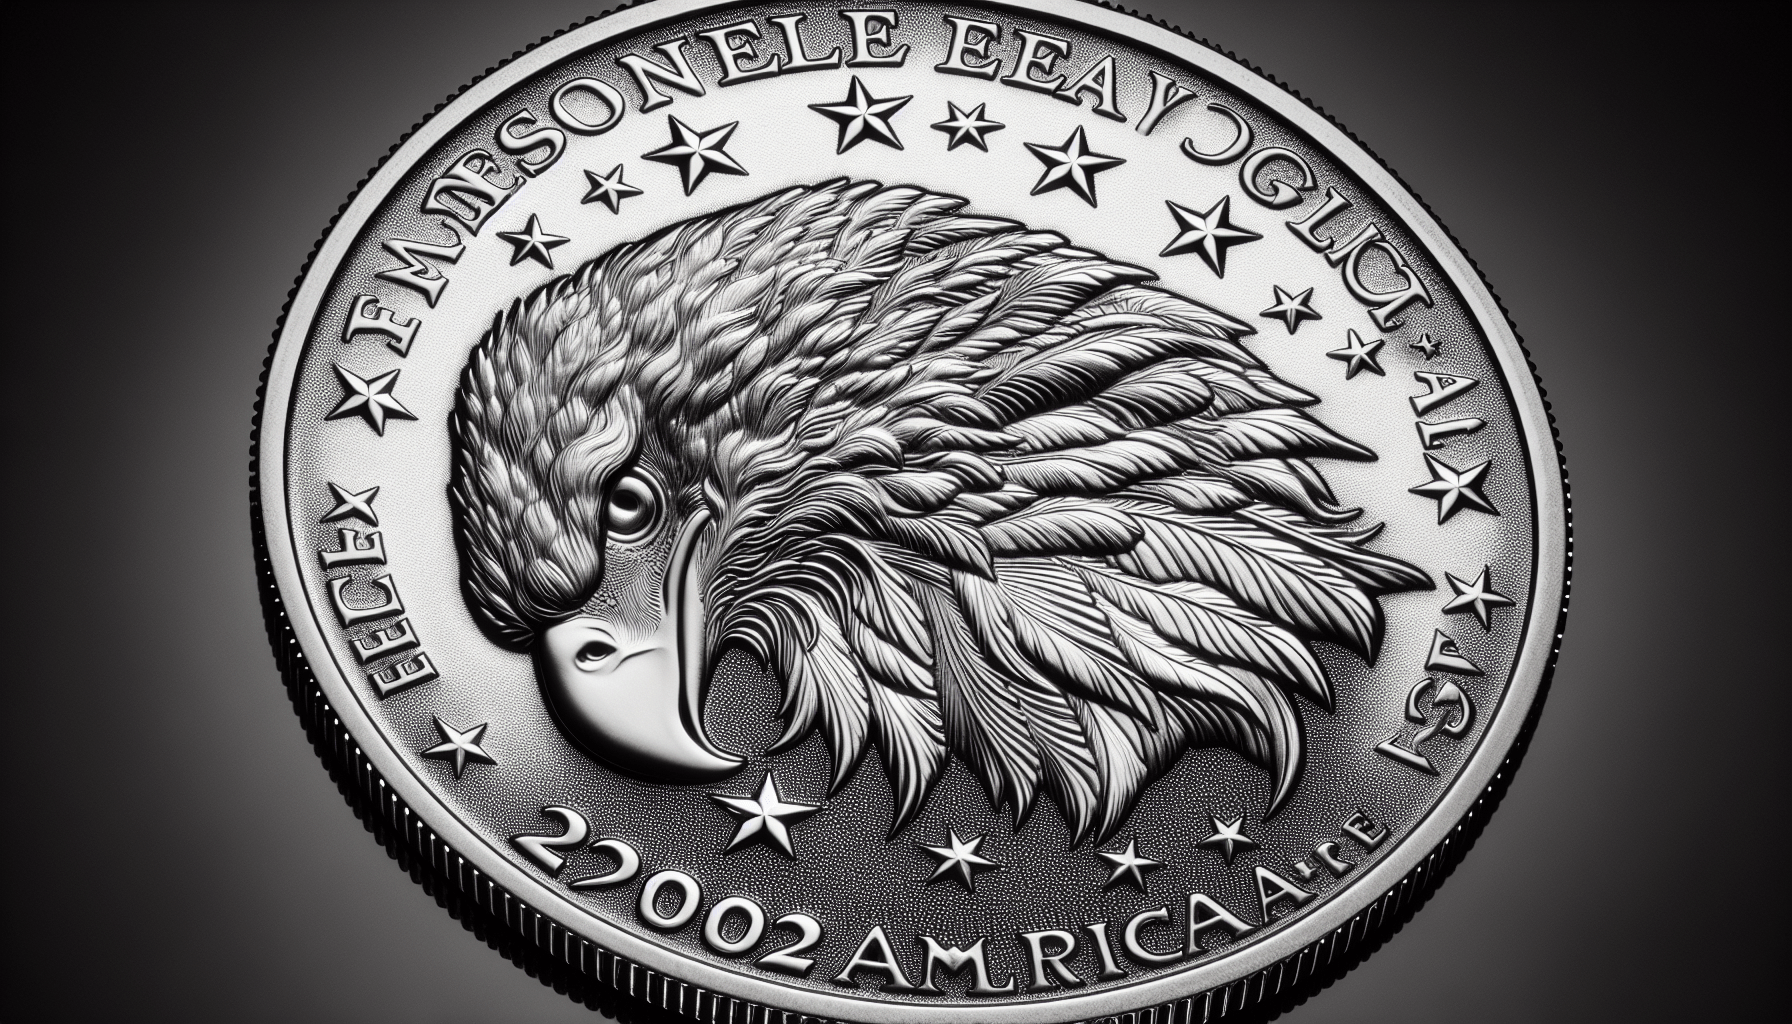 2002 – (W) 1 oz American Eagle Coin Review